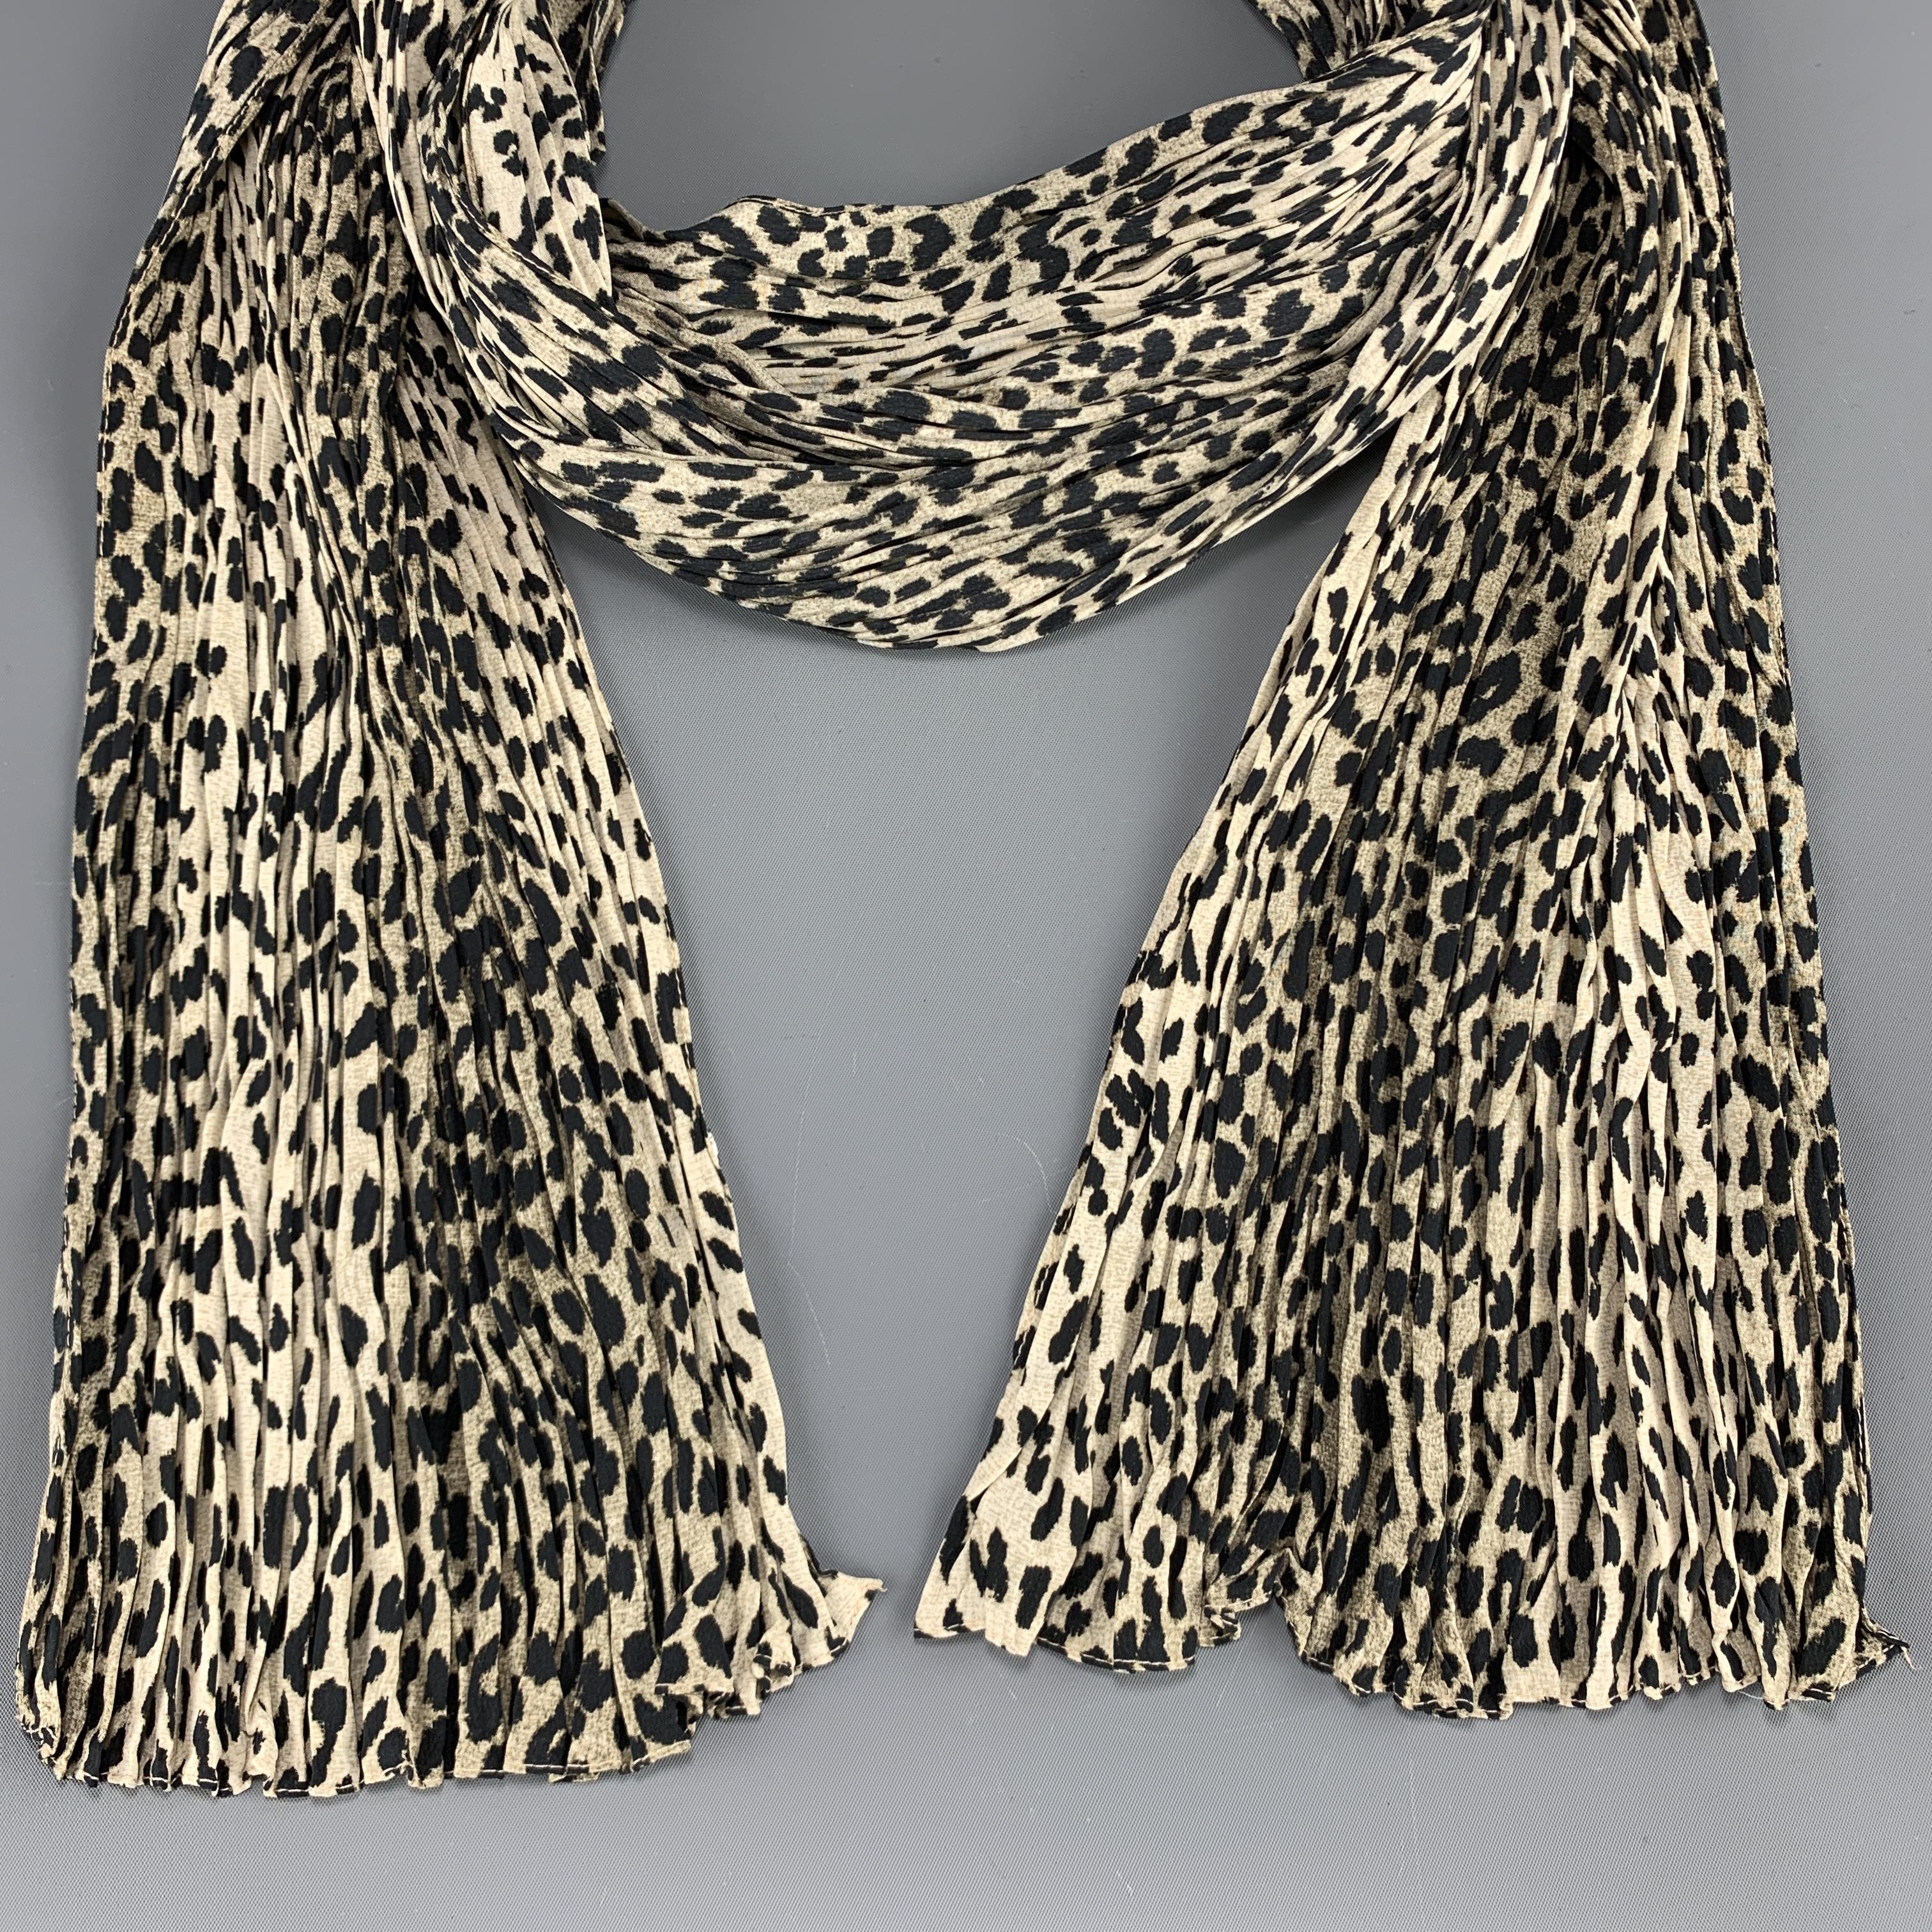 SAINT LAURENT scarf comes in beige leopard print silk with an all over pleated wrinkle texture. Made in Italy.

Excellent Pre-Owned Condition.

92 x 11 in.
